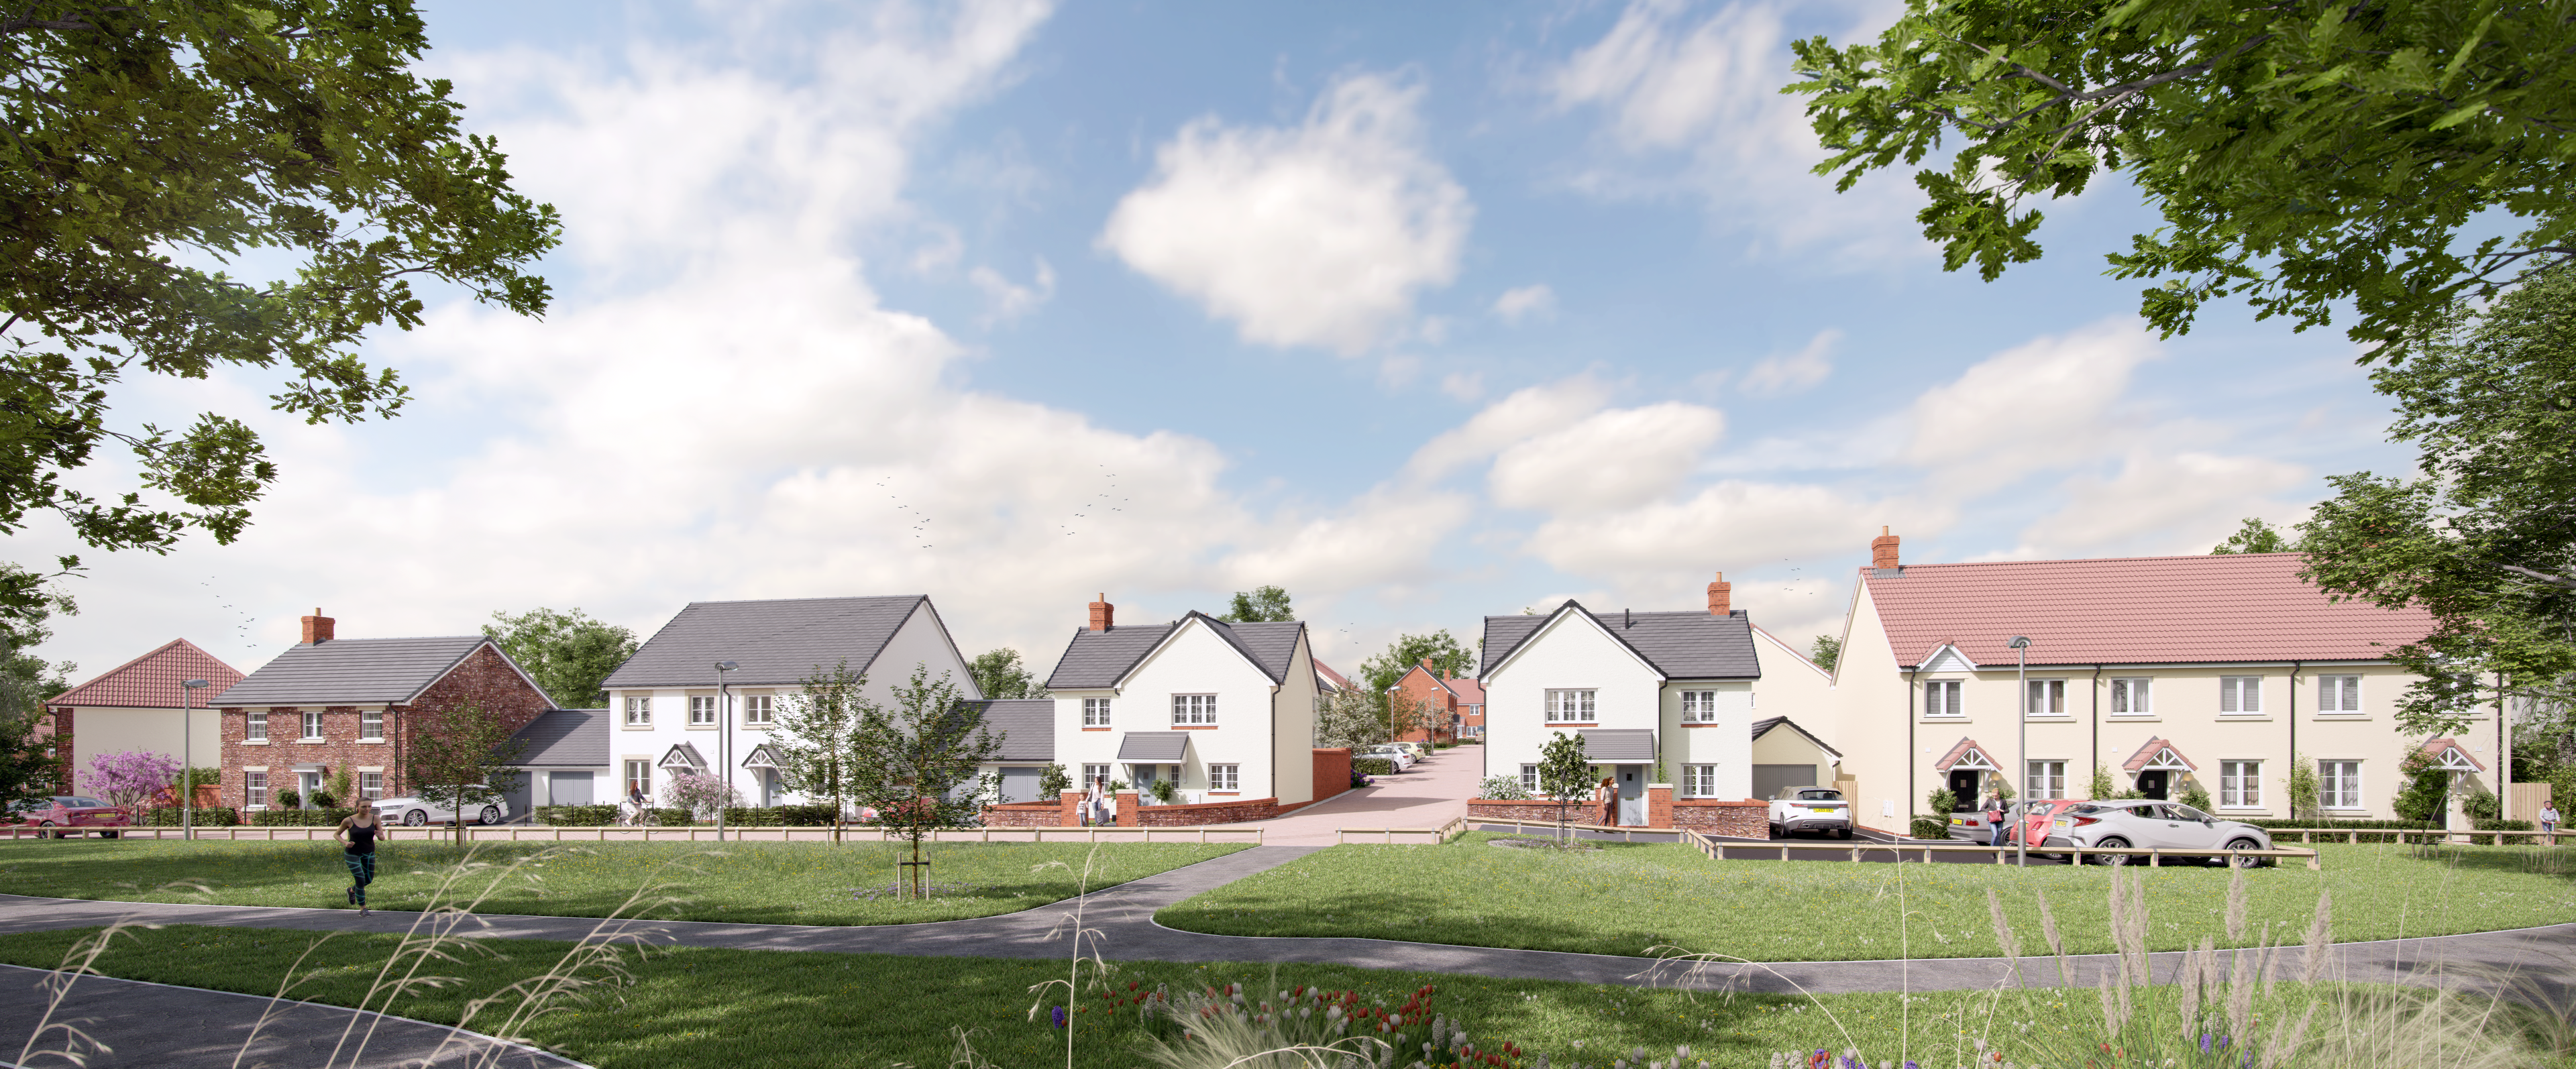 Join us for the opening of Liddymore Park’s show homes in Watchet!